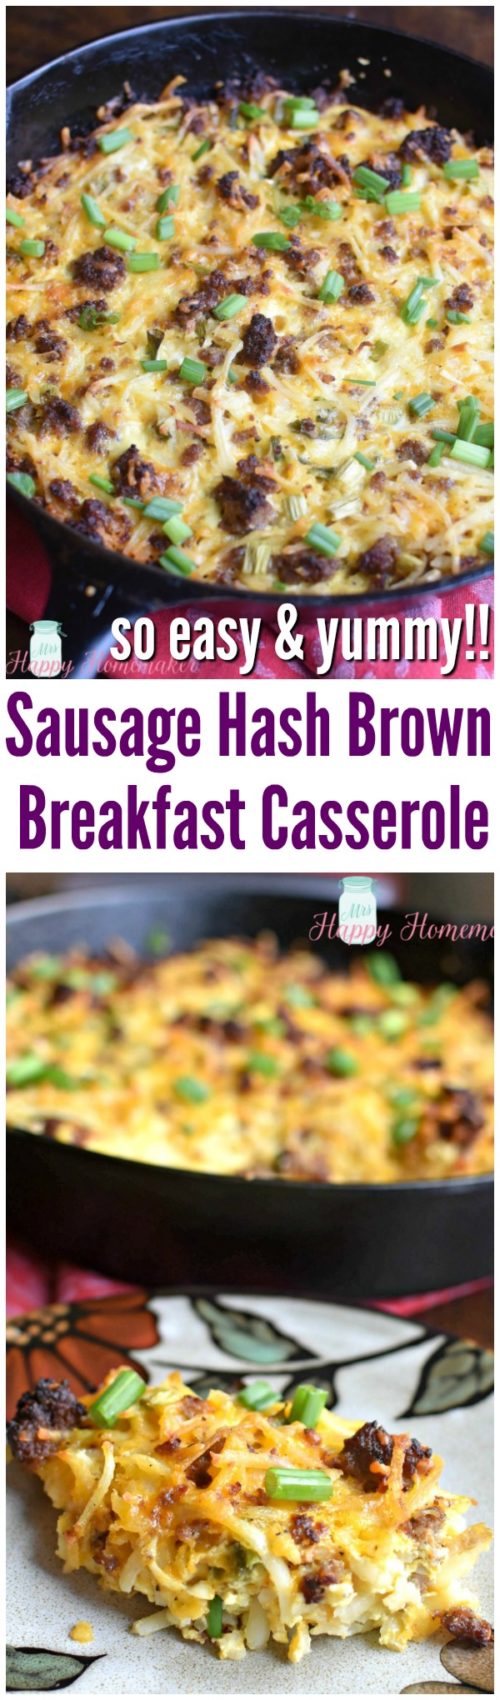 Sausage Hash Brown Breakfast Casserole - so easy and yummy!! | MrsHappyHomemaker.com @mrshappyhomemaker #breakfastcasserole #casserole #breakfast #brunch